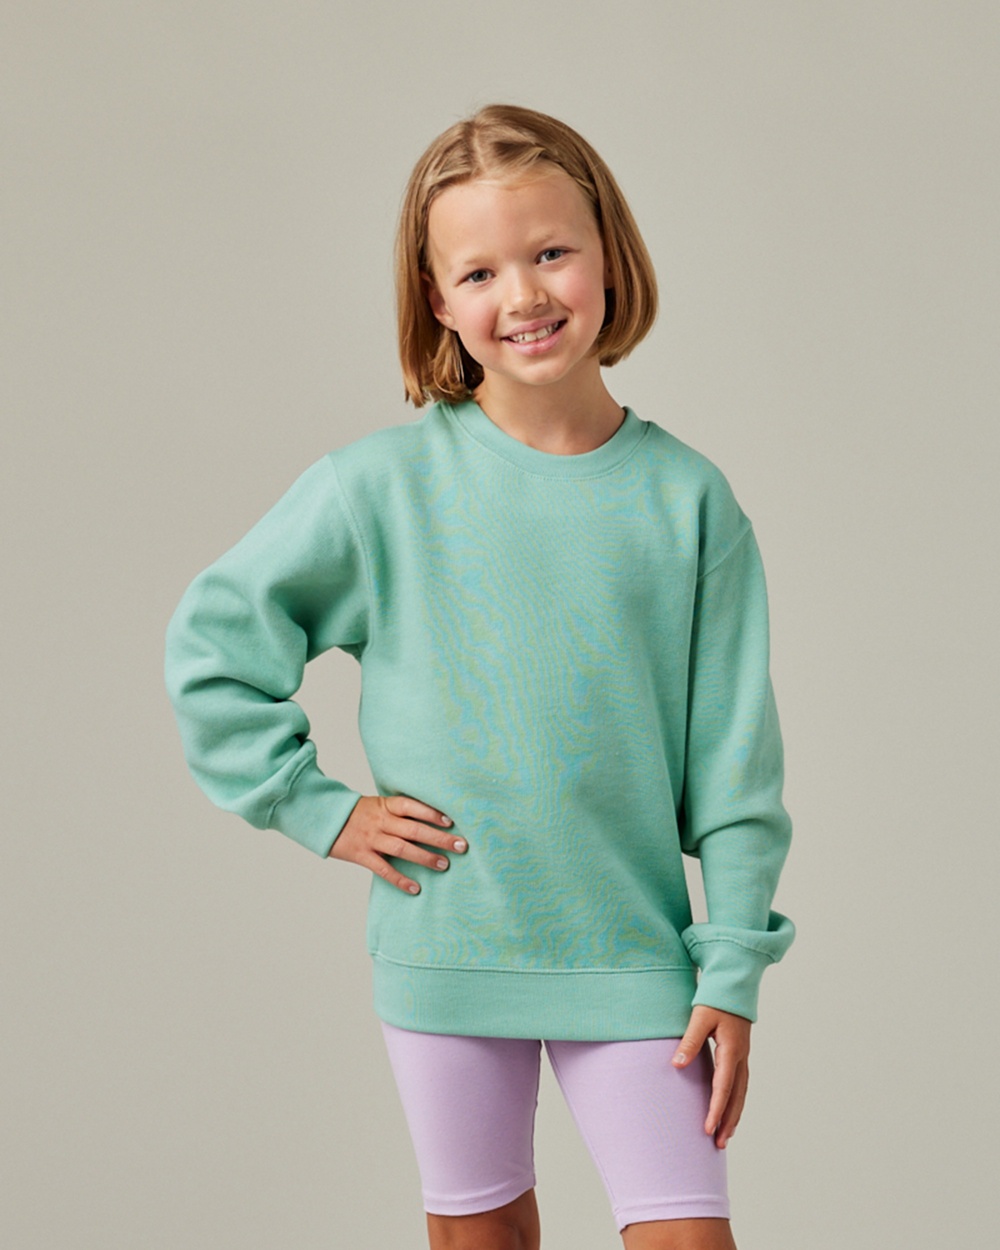 Enza® 96279 Youth Fleece Crew - Wholesale Apparel and Supplies